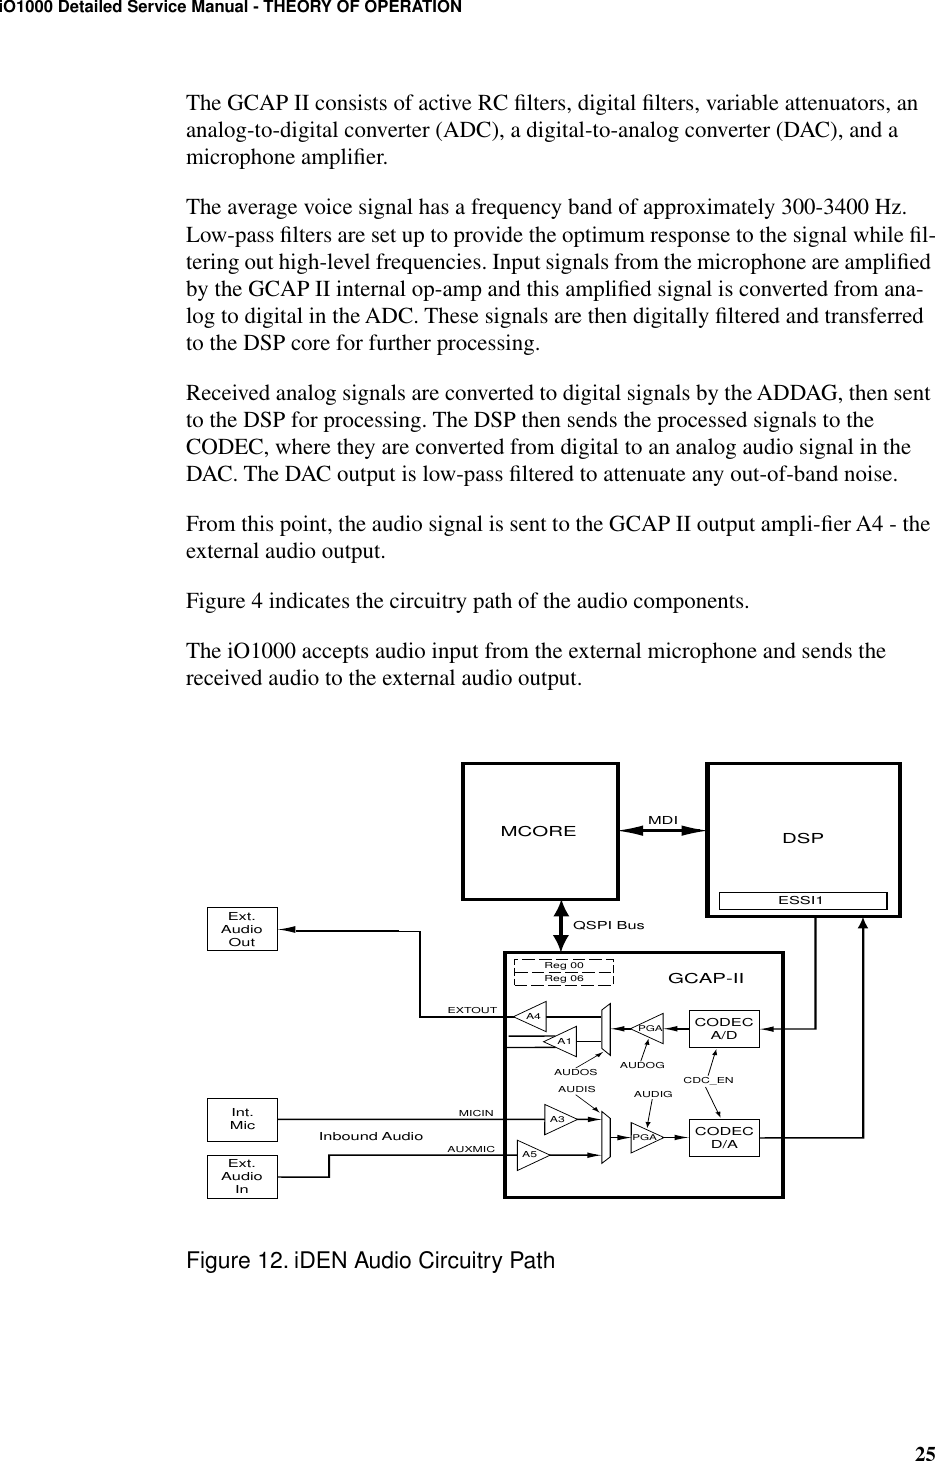 25iO1000 Detailed Service Manual - THEORY OF OPERATIONThe GCAP II consists of active RC ﬁlters, digital ﬁlters, variable attenuators, an analog-to-digital converter (ADC), a digital-to-analog converter (DAC), and a microphone ampliﬁer.The average voice signal has a frequency band of approximately 300-3400 Hz. Low-pass ﬁlters are set up to provide the optimum response to the signal while ﬁl-tering out high-level frequencies. Input signals from the microphone are ampliﬁed by the GCAP II internal op-amp and this ampliﬁed signal is converted from ana-log to digital in the ADC. These signals are then digitally ﬁltered and transferred to the DSP core for further processing.Received analog signals are converted to digital signals by the ADDAG, then sent to the DSP for processing. The DSP then sends the processed signals to the CODEC, where they are converted from digital to an analog audio signal in the DAC. The DAC output is low-pass ﬁltered to attenuate any out-of-band noise.From this point, the audio signal is sent to the GCAP II output ampli-ﬁer A4 - the external audio output. Figure 4 indicates the circuitry path of the audio components.The iO1000 accepts audio input from the external microphone and sends the received audio to the external audio output. Figure 12. iDEN Audio Circuitry PathMCORE DSPMDIESSI1QSPI BusInbound AudioInt.MicExt.AudioOutExt.AudioInAUXMICMICINGCAP-IIReg 00Reg 06CODECA/DCODECD/ACDC_ENAUDOGAUDIGAUDOSAUDISEXTOUTA1A4A3A5PGAPGA